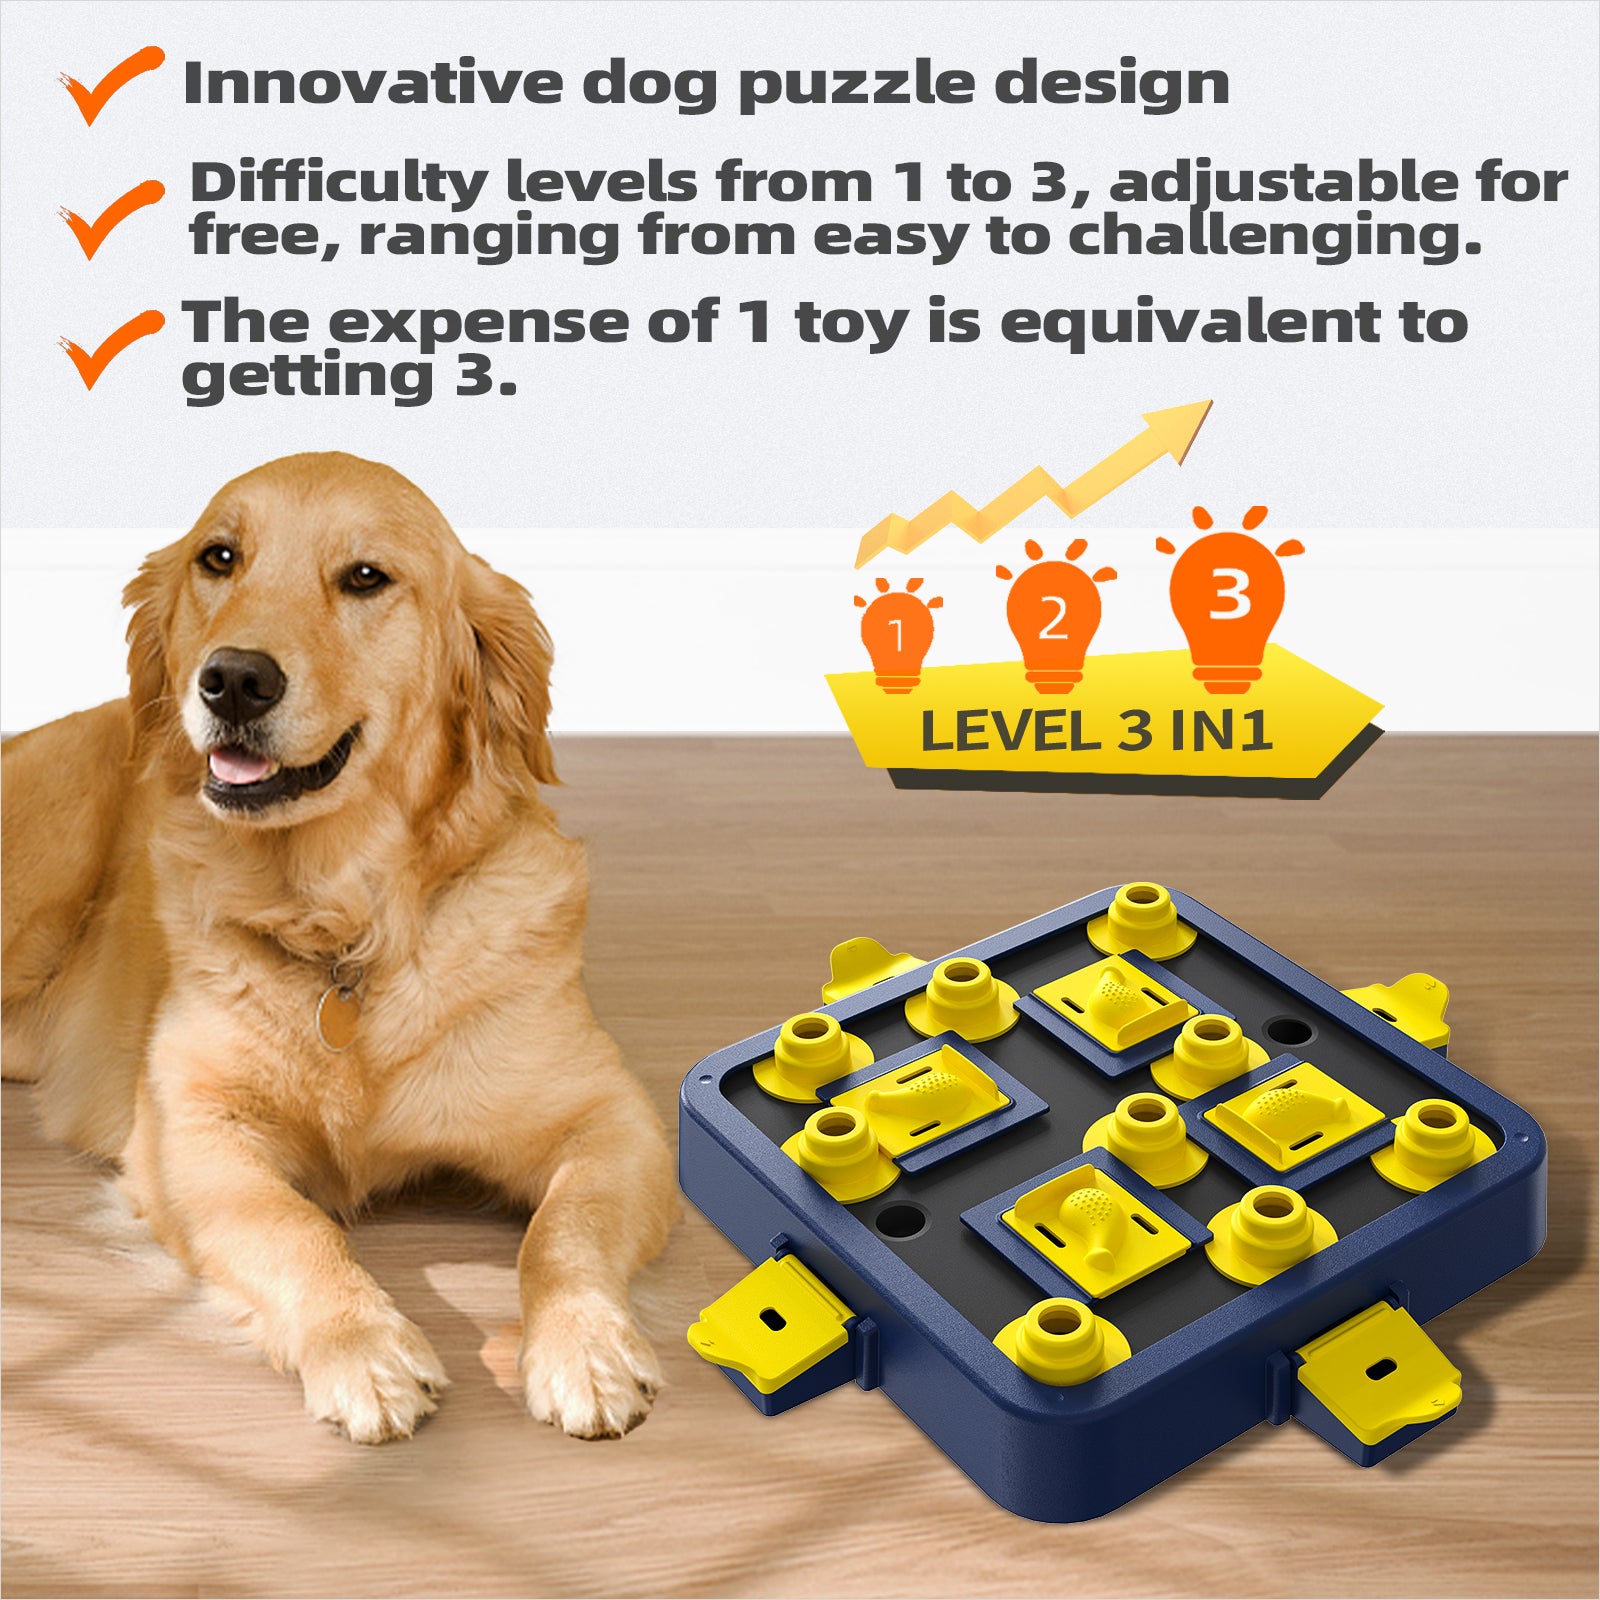 KADTC Dog Puzzle Toy For Small/Medium/Large Dogs Mental Stimulation Boredom busters Puppy Brain Toys Keep Busy Enrichment Puzzles Feeder Food Treat Interactive Level 3 2 1 Mentally Stimulating Games